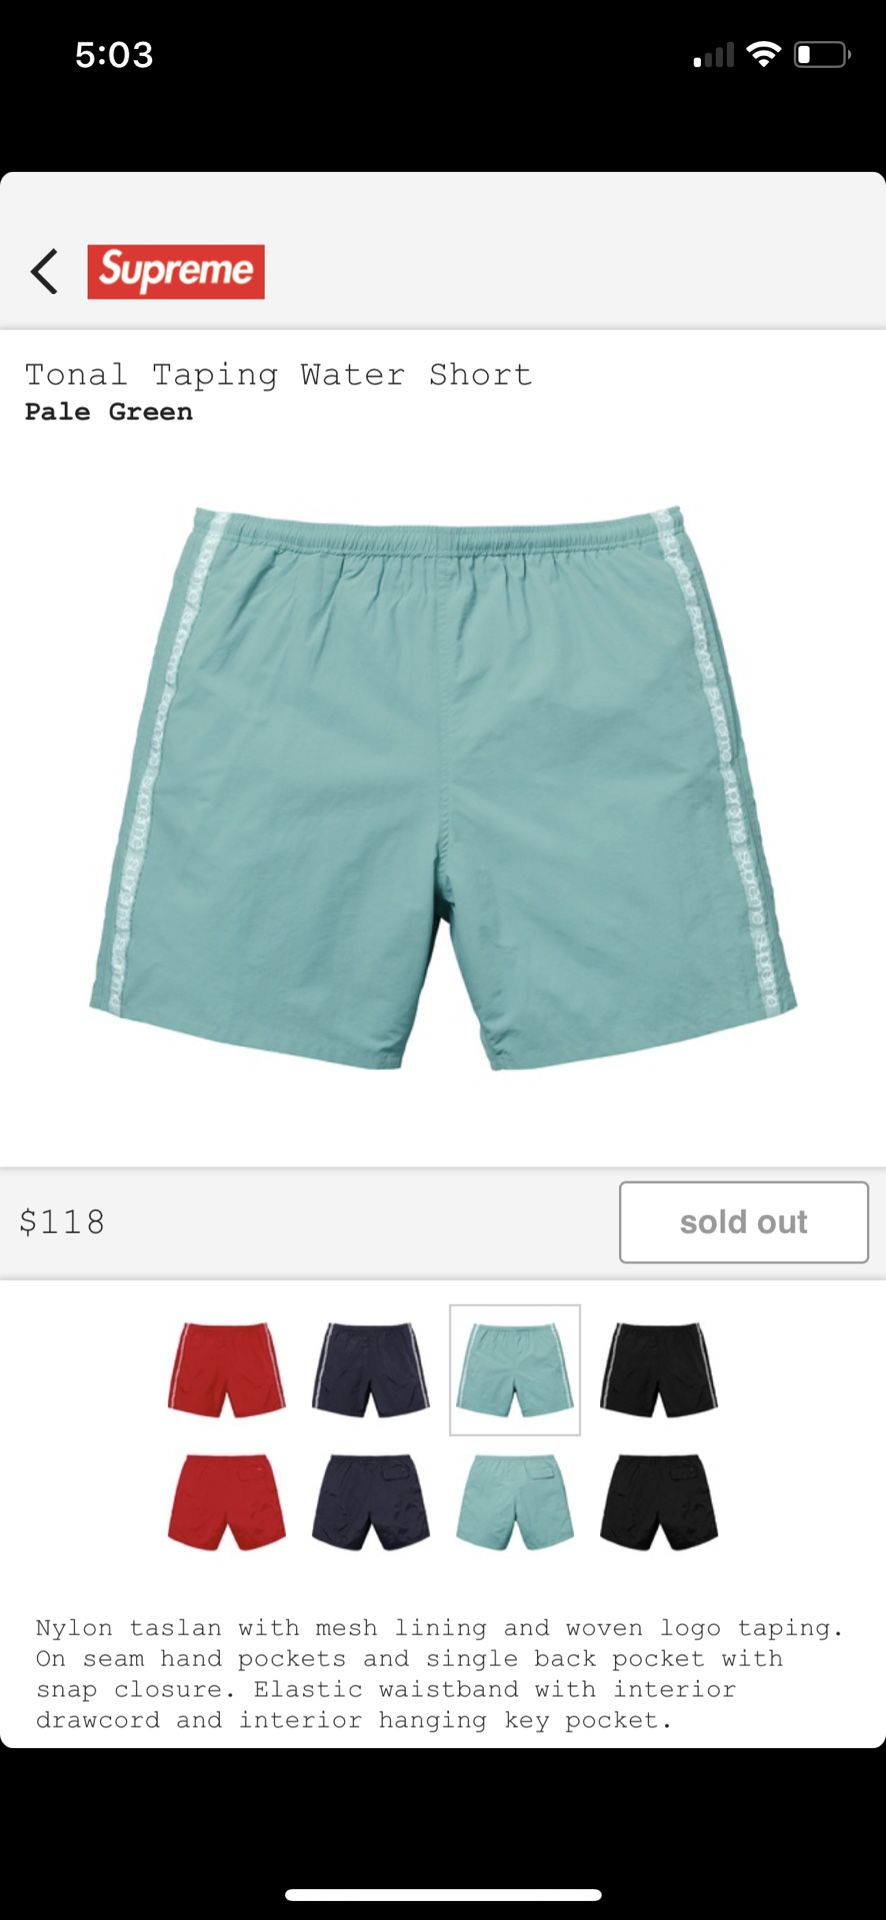 Supreme tonal tapes shorts large for Sale in Artesia, CA - OfferUp